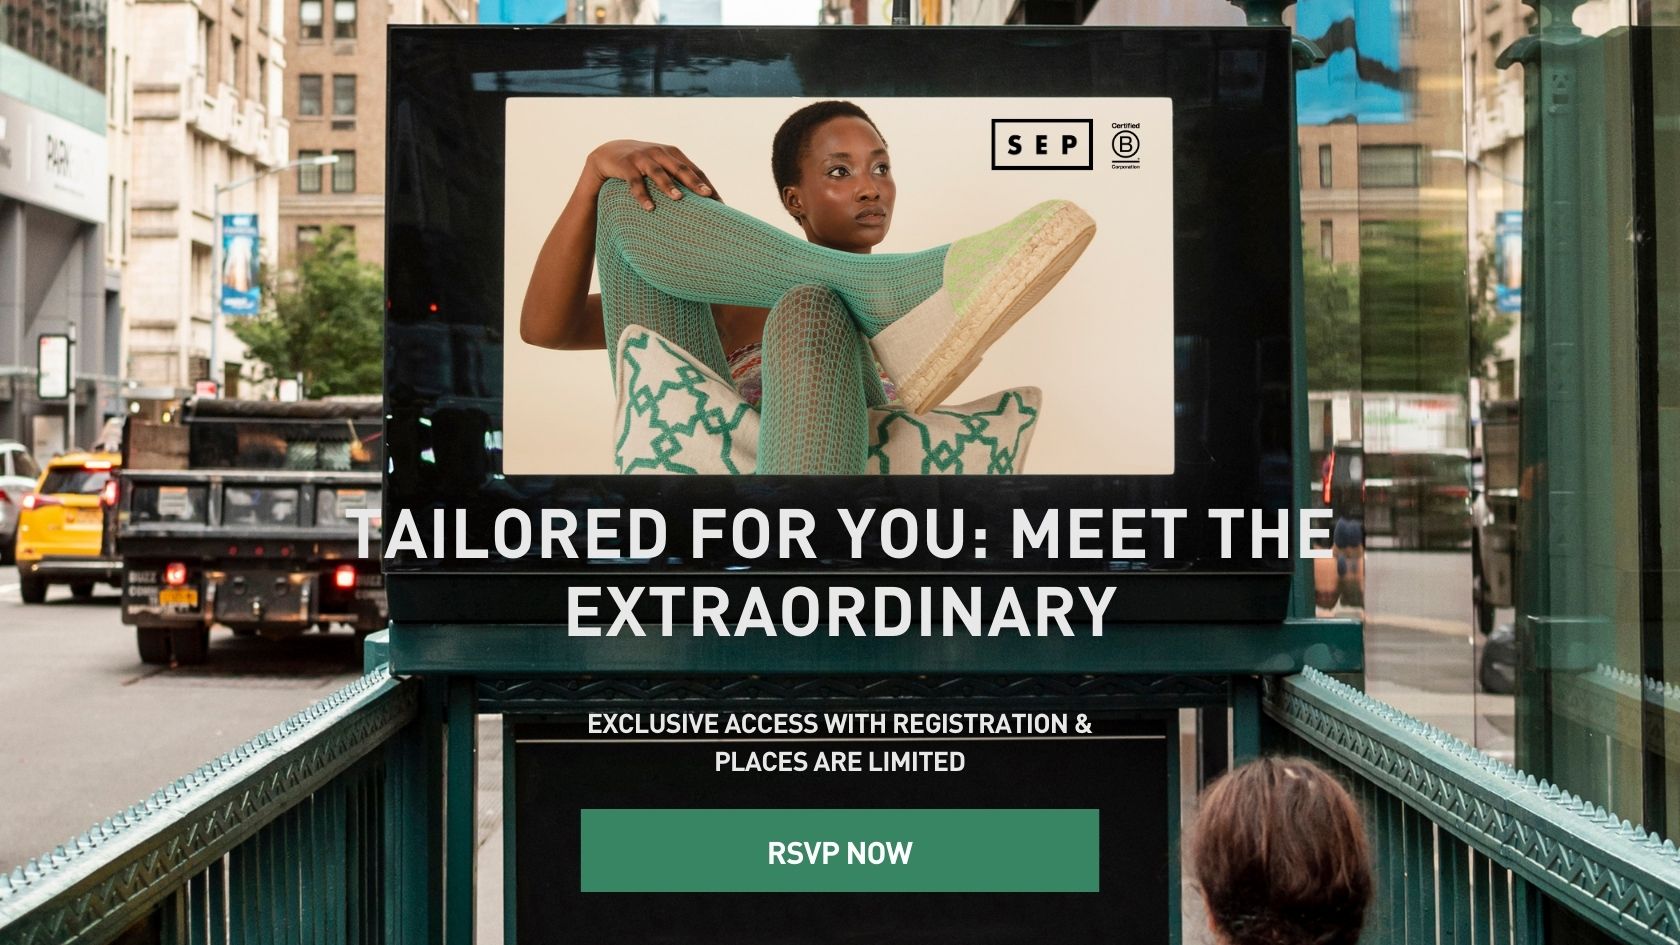 TAILORED FOR YOU: MEET THE EXTRAORDINARY